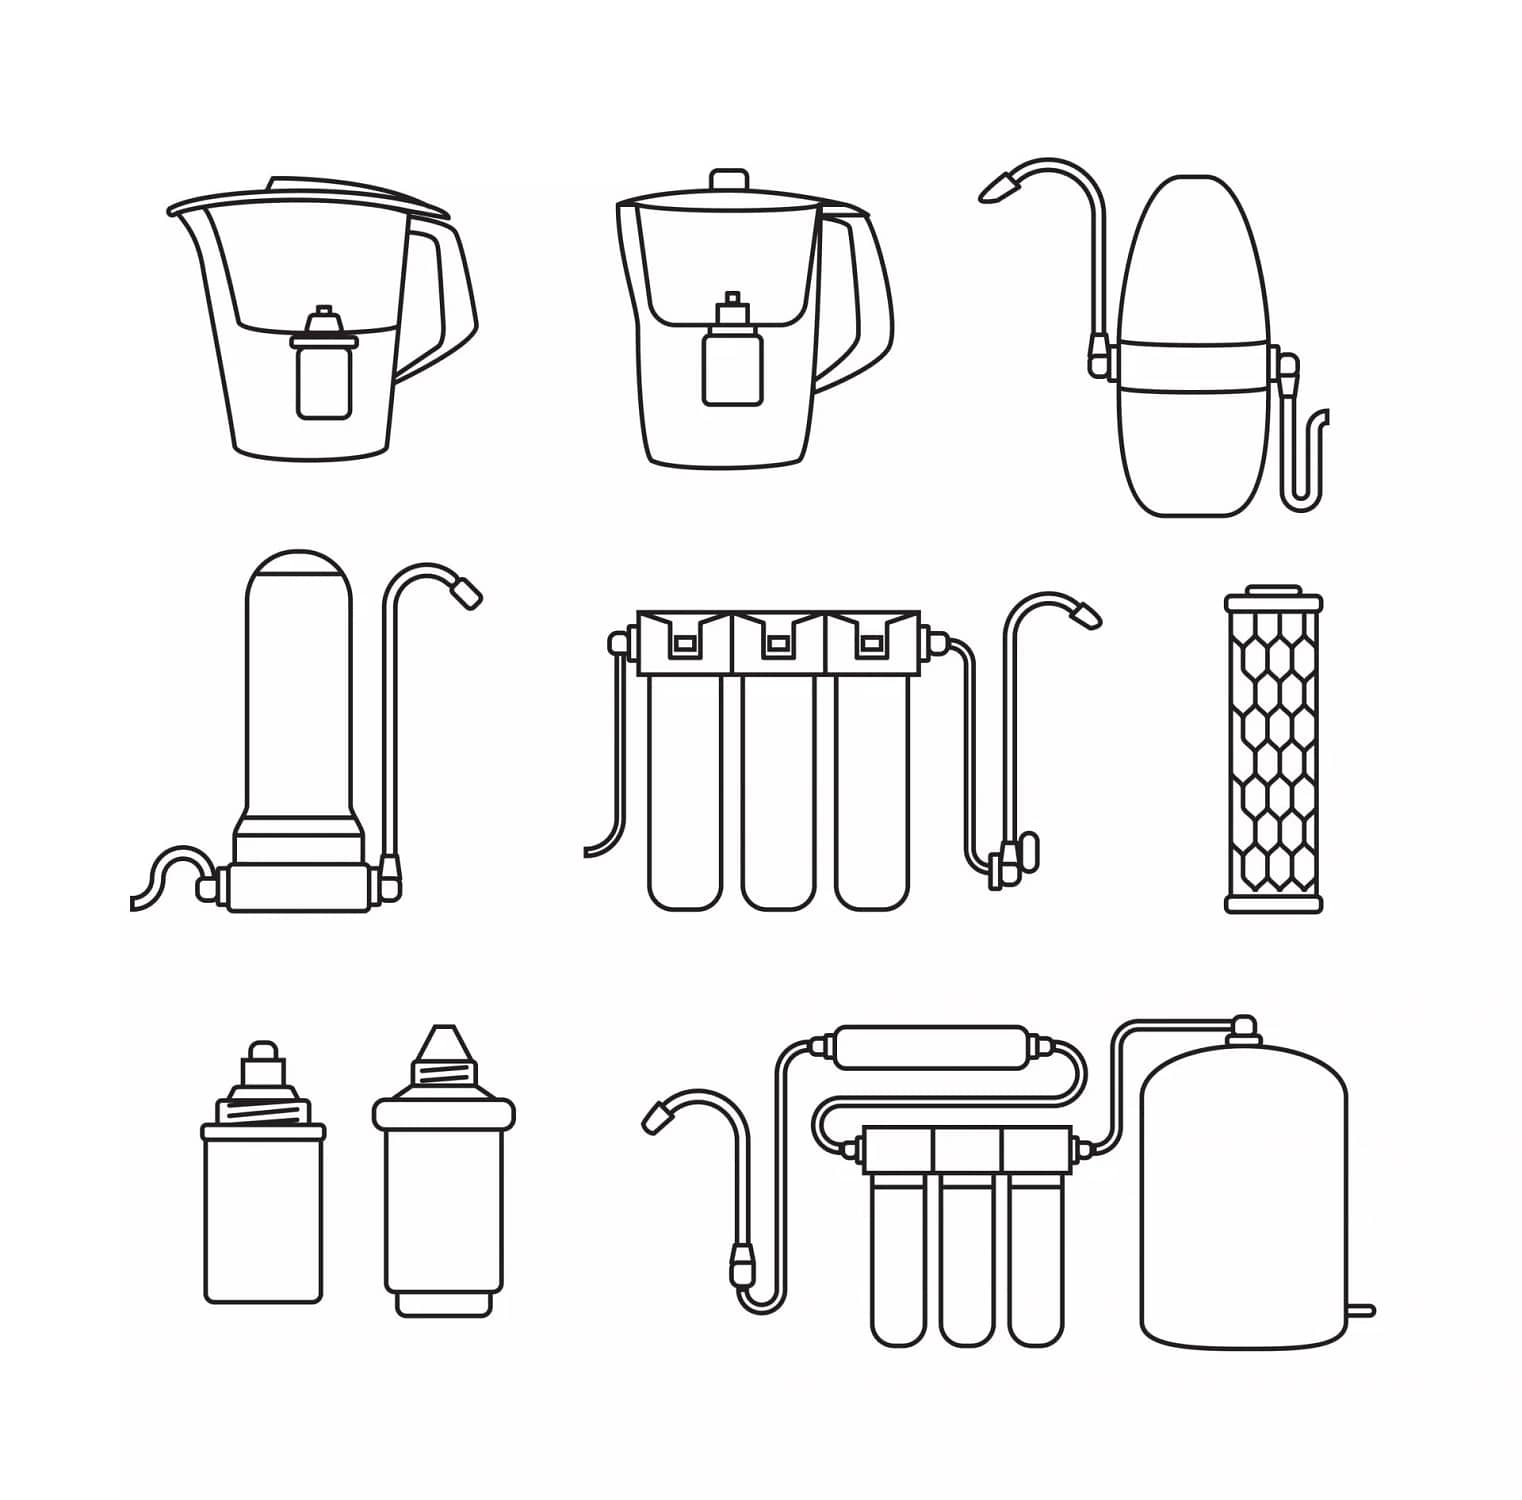 Vector image of various water filters